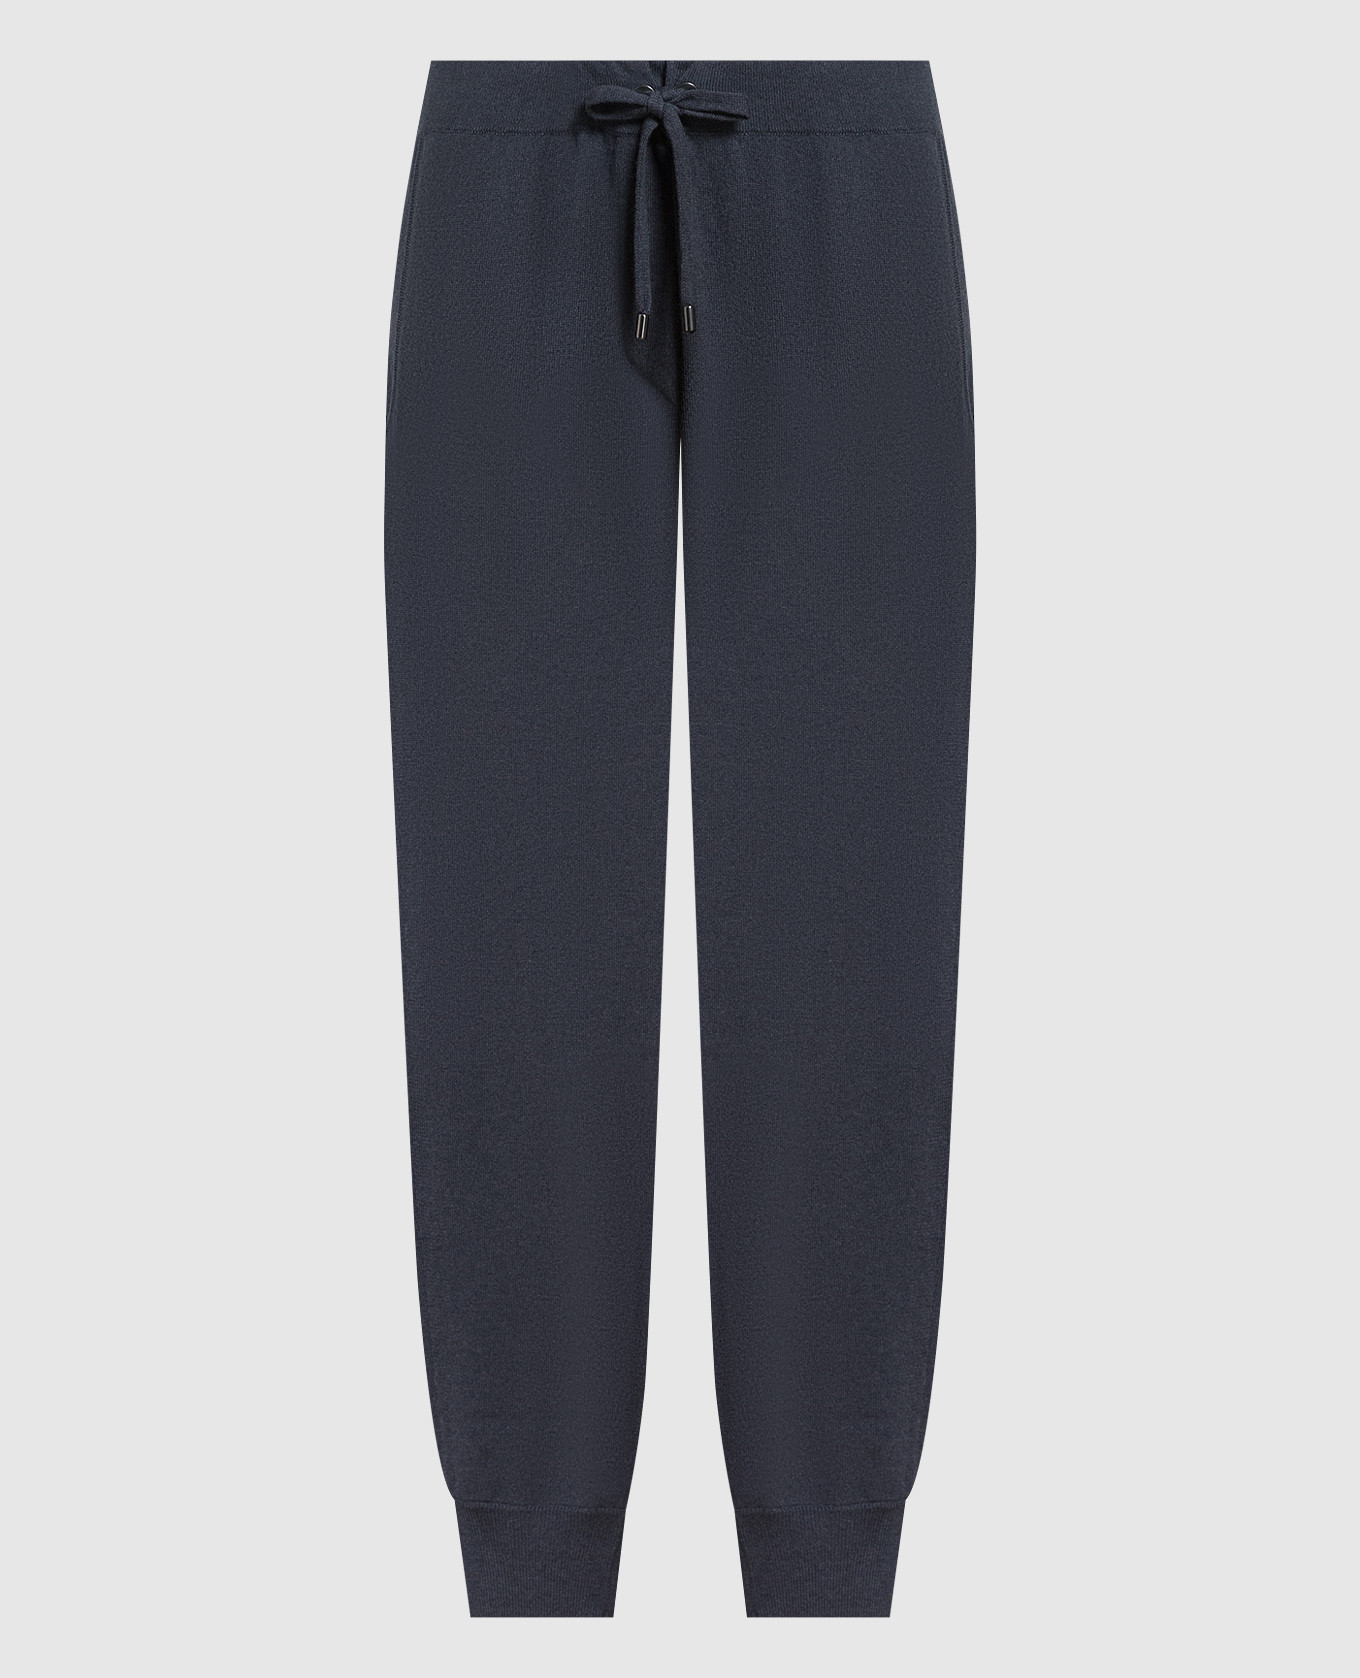 Blue cashmere joggers with monil chain